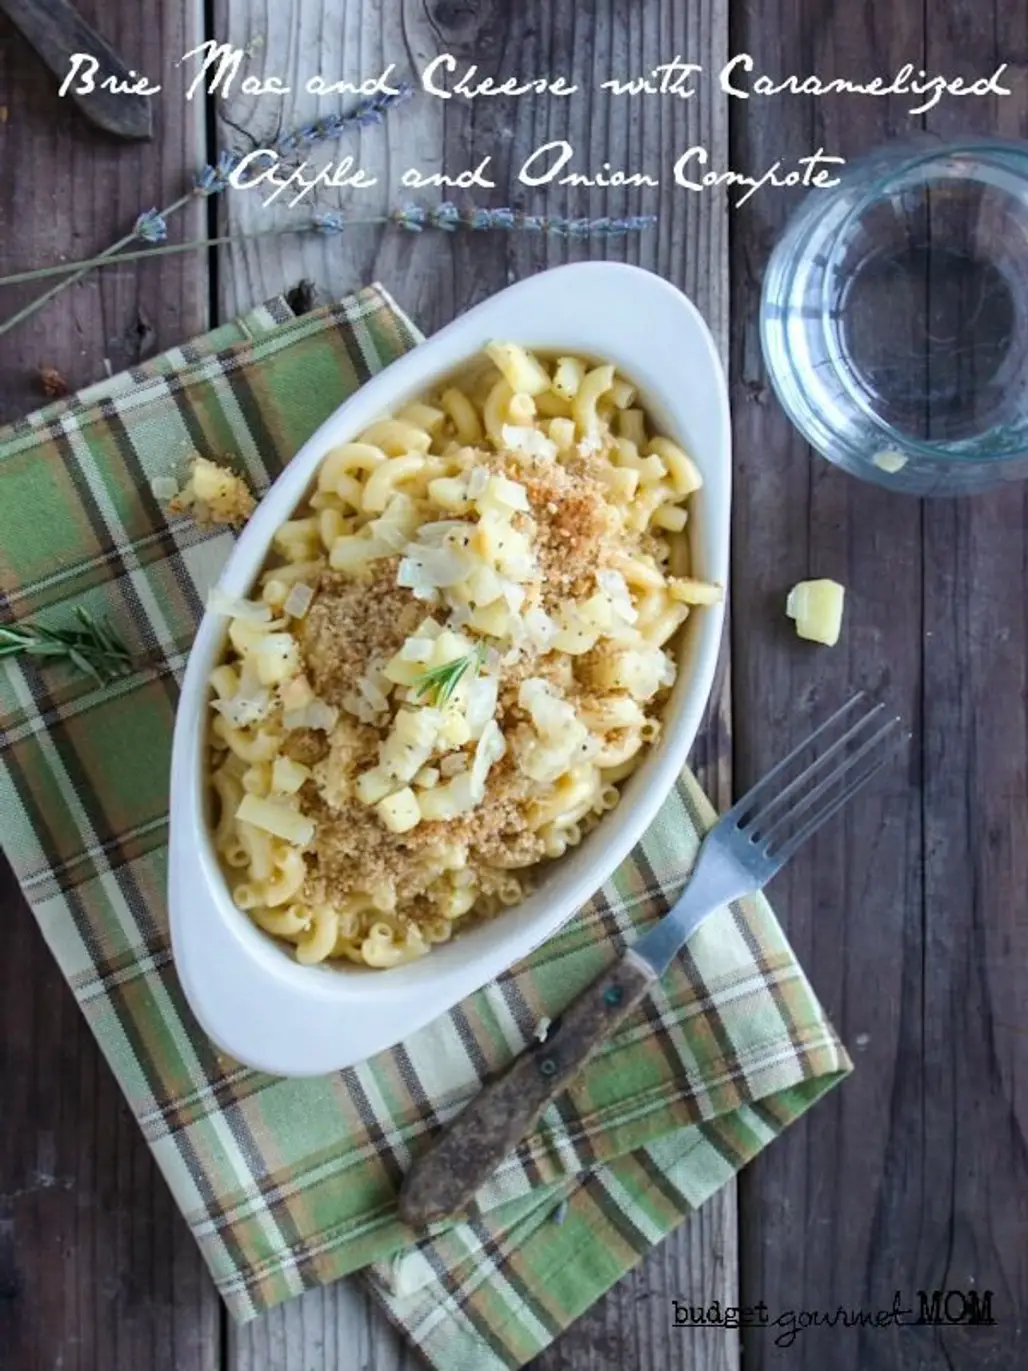 Brie Mac and Cheese with Caramelized Apple and Onion Compote